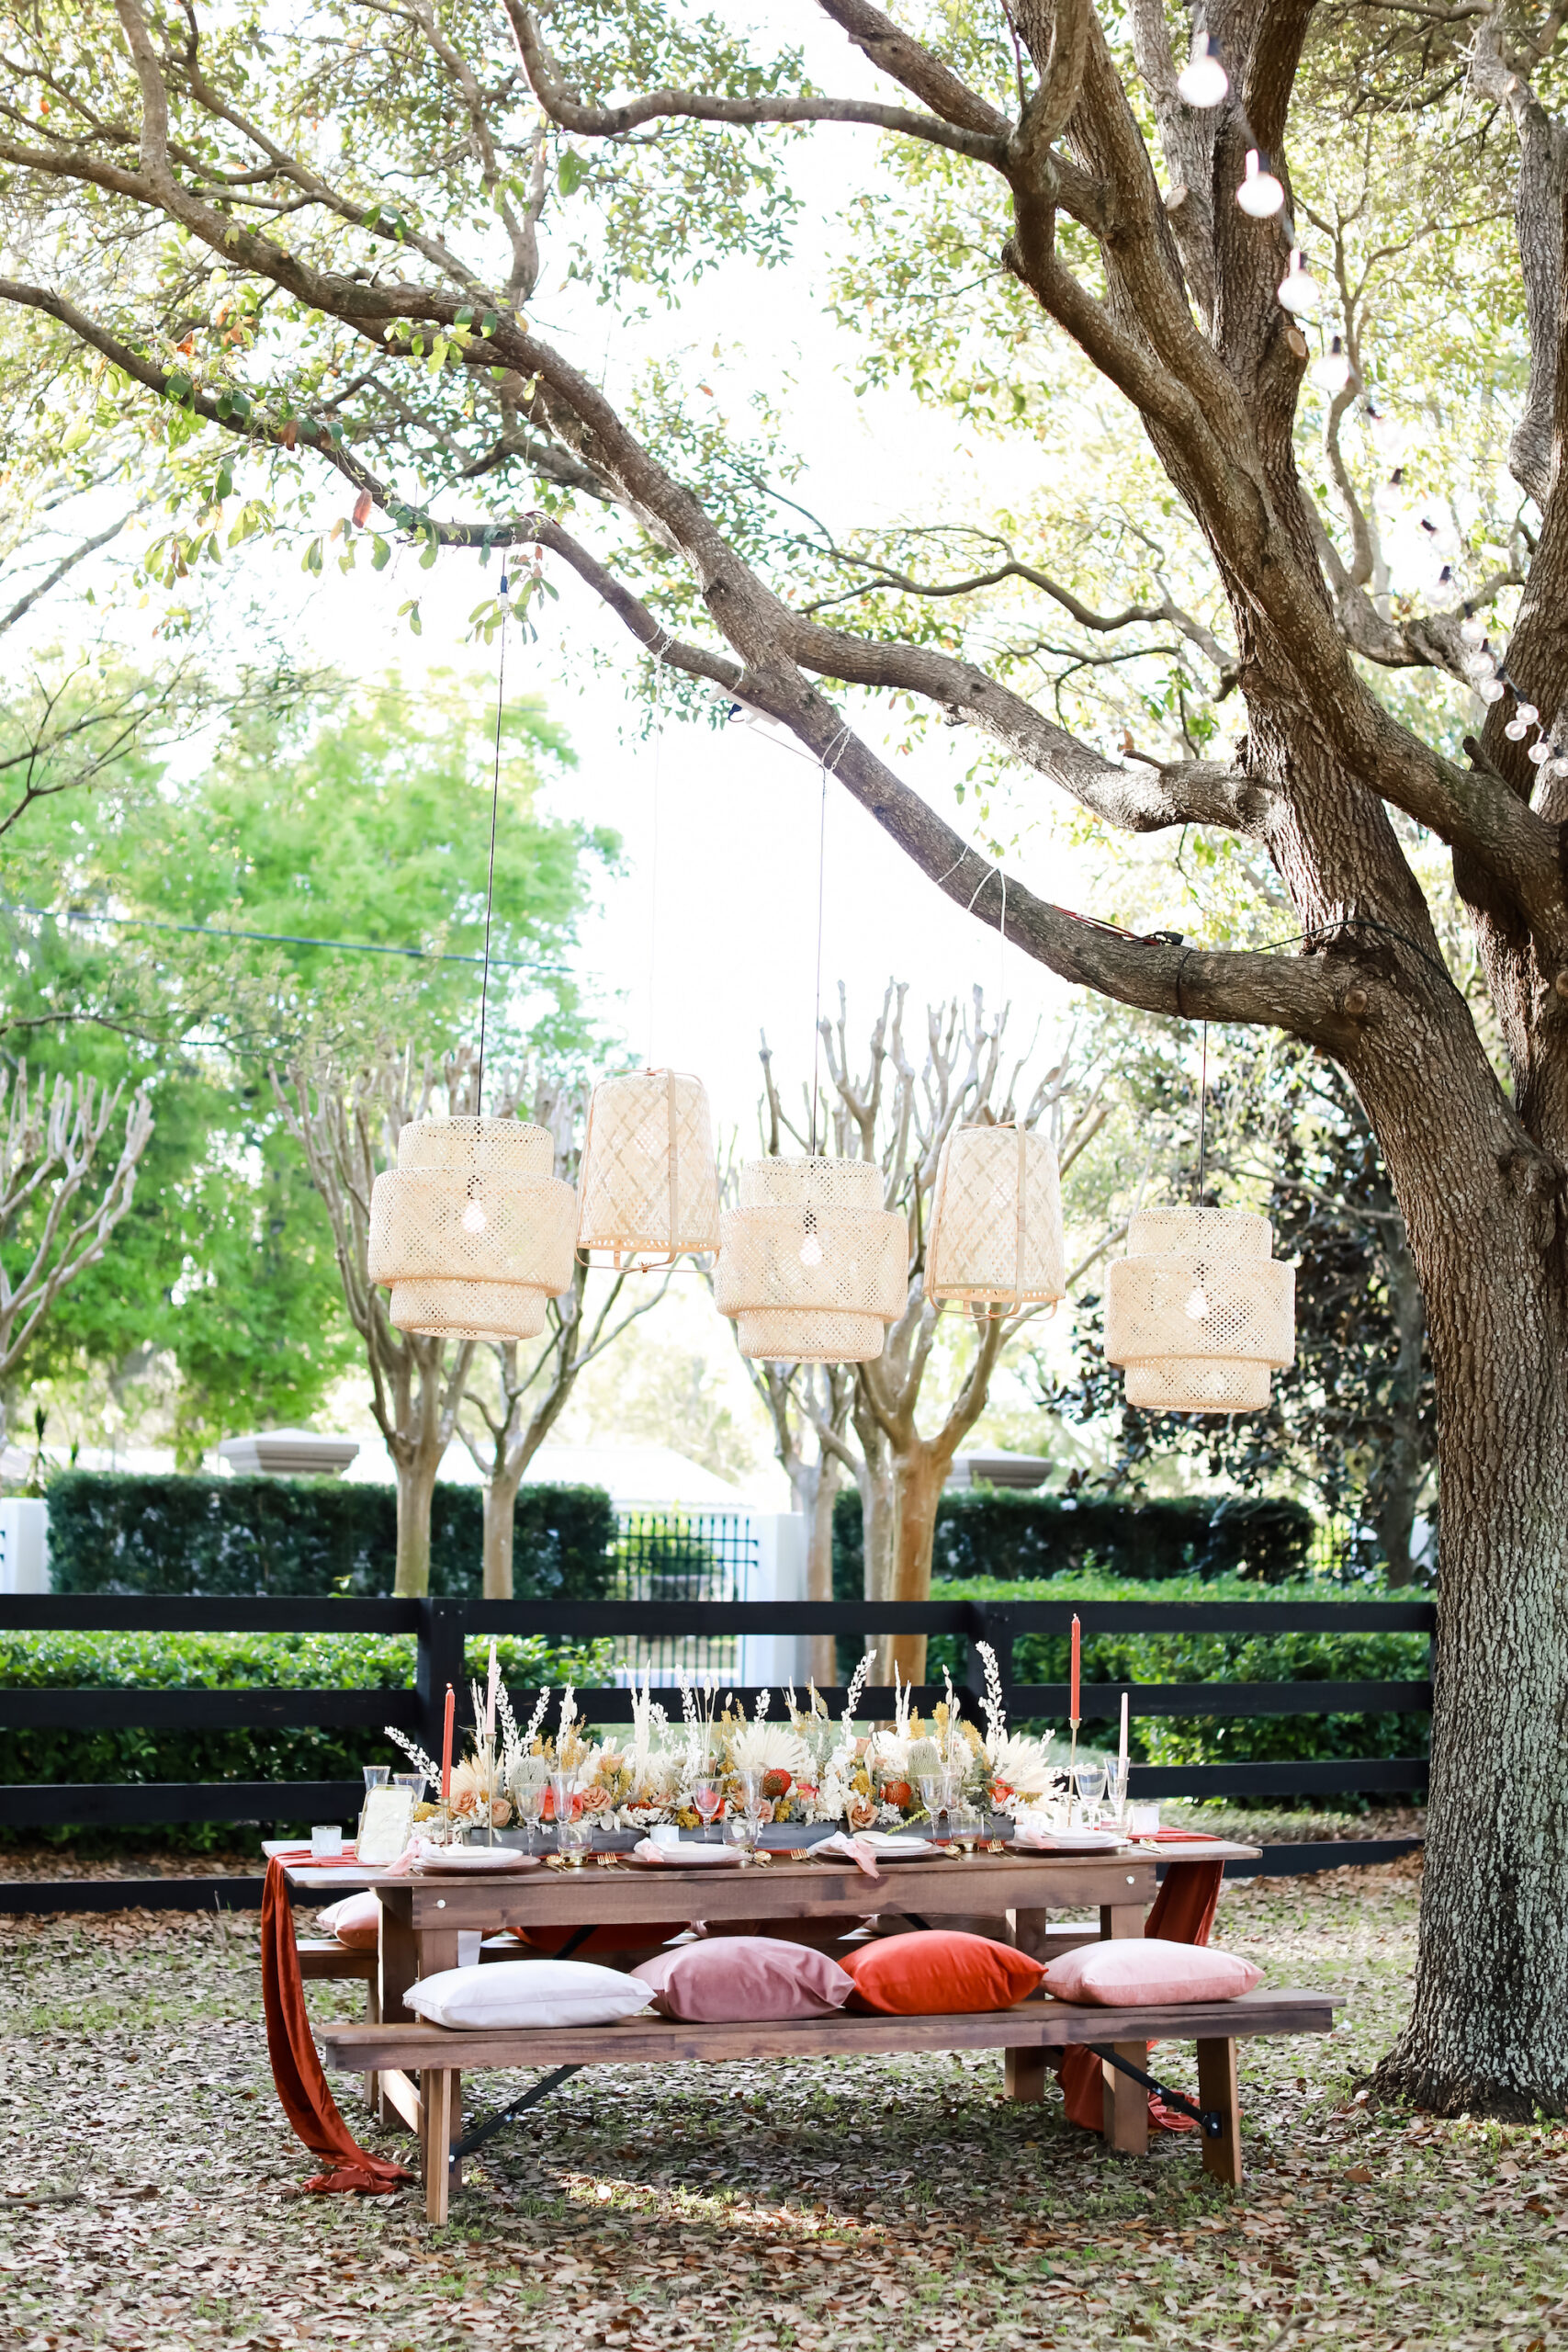 Boho Styled Wicker Lanterns Outdoor Wedding Decor Inspiration Boho Picnic with and Fall Reception Tablescape with Wooden Farm Table and Benches Centerpiece Inspiration | Tampa Bay Rentals Gabro Event Services